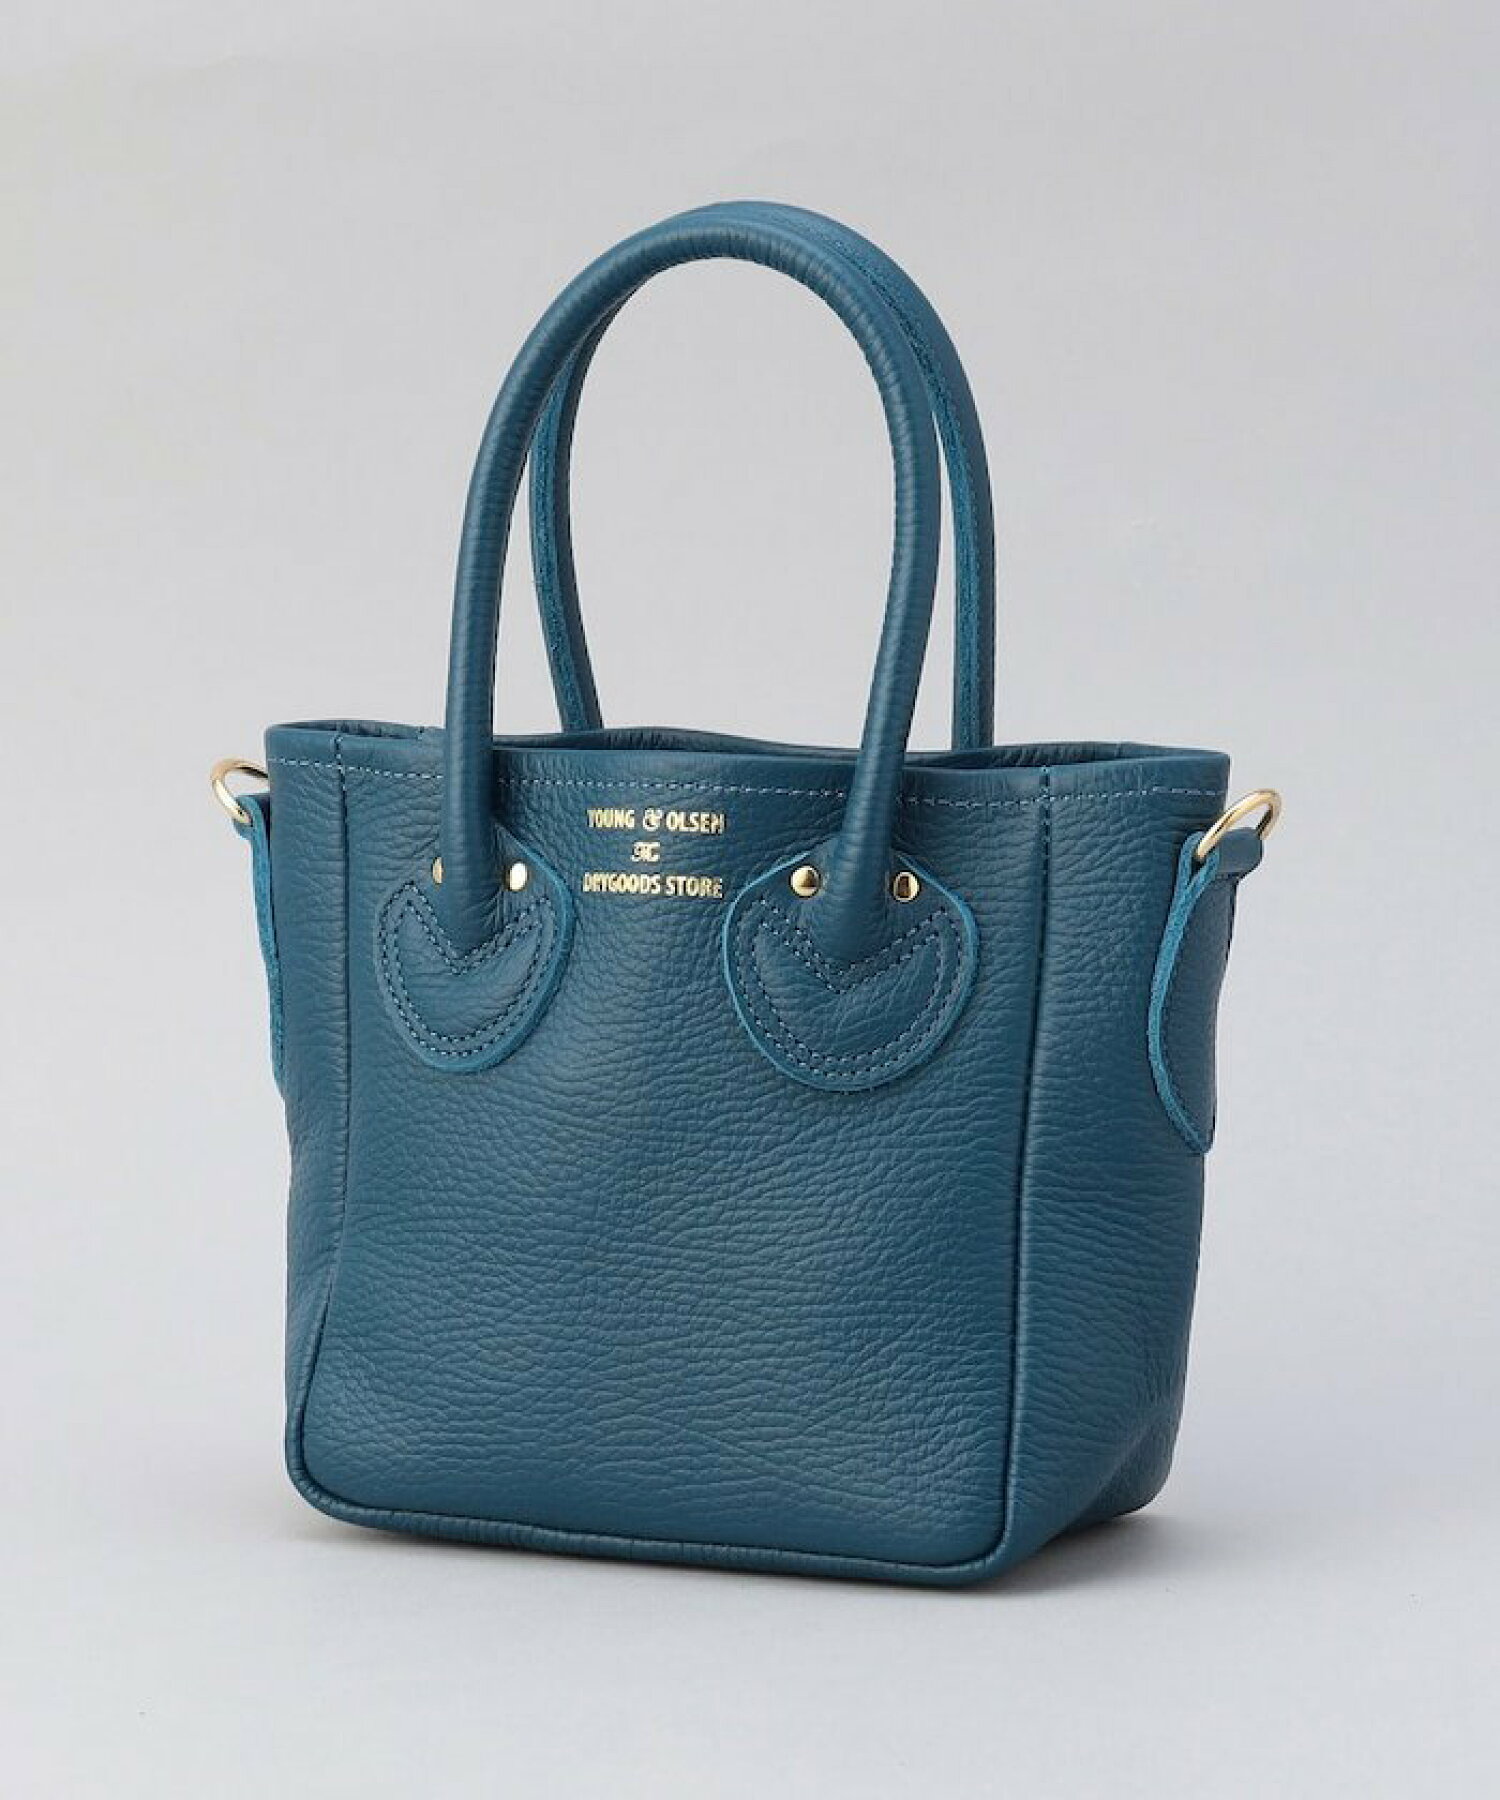 EMBOSSED LEATHER TOTE BAGXS